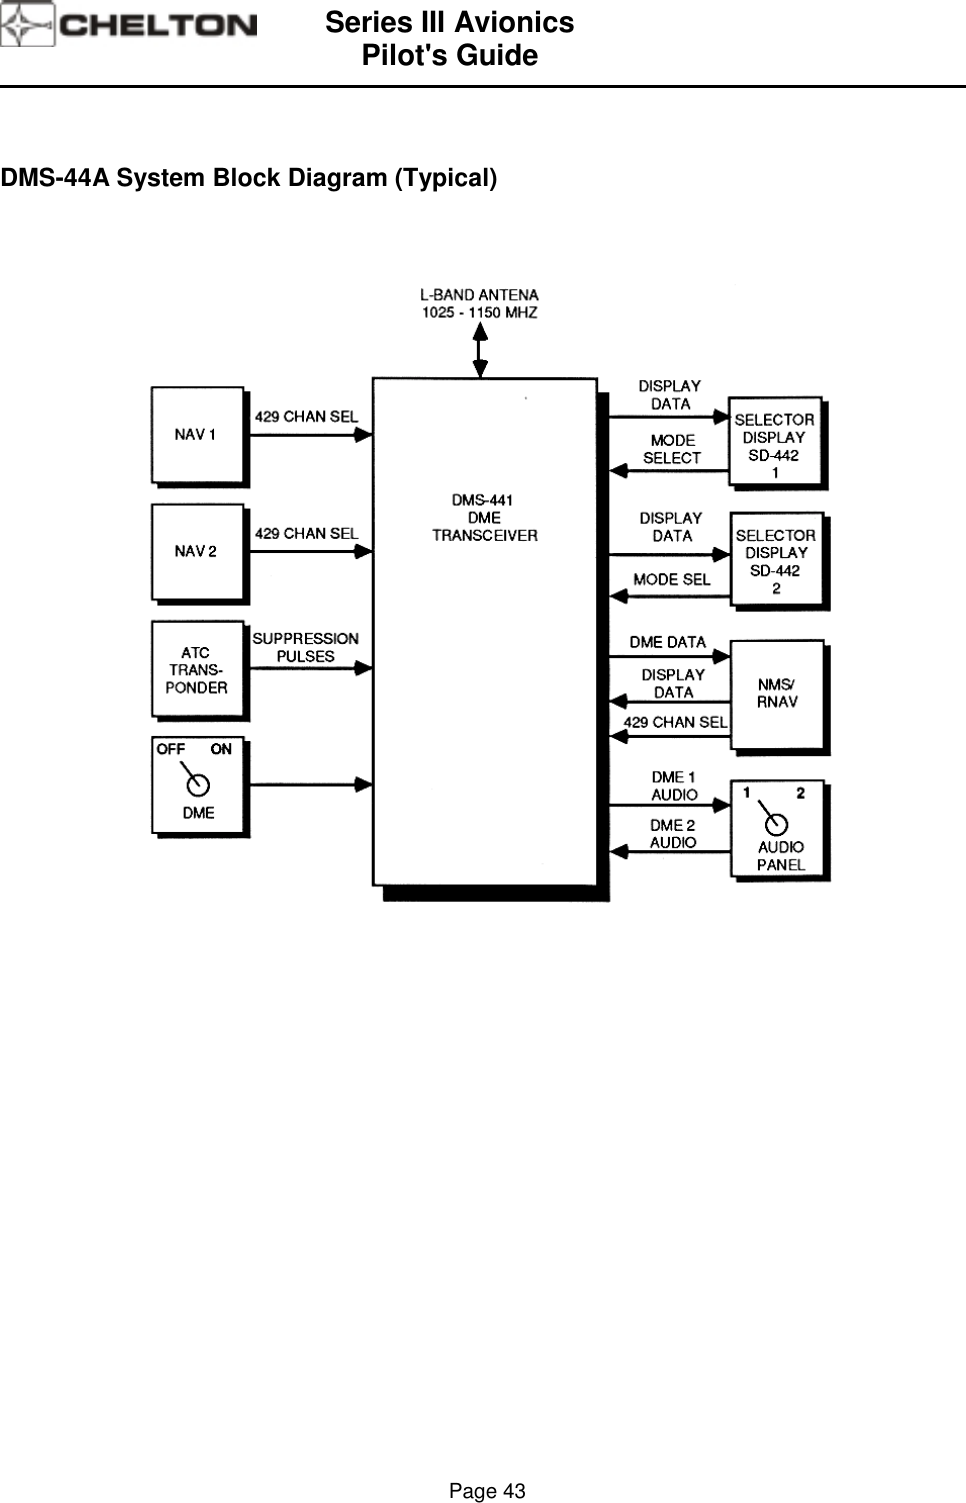 Series III AvionicsPilot&apos;s Guide                                                                                                                                          Page 43DMS-44A System Block Diagram (Typical)